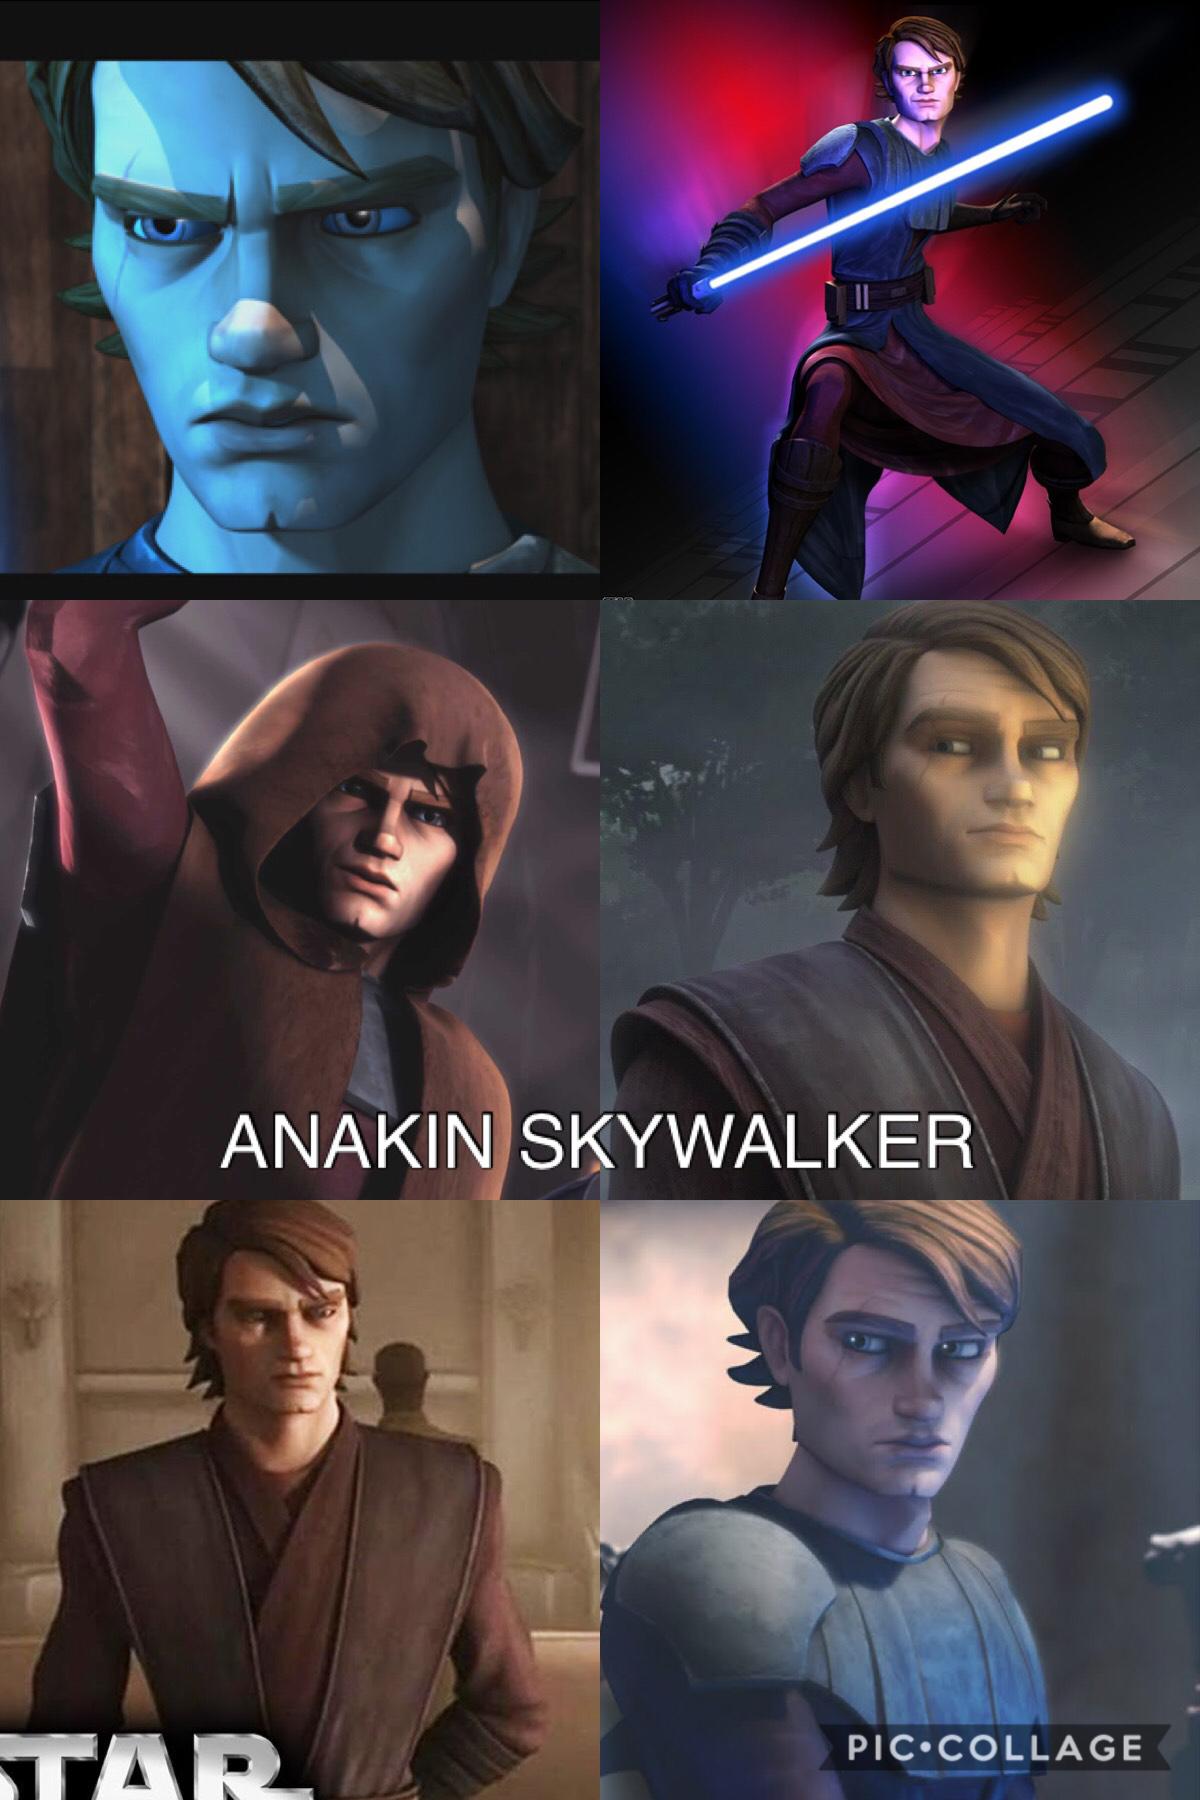 💖OMG I LOVE HIM!!😱 Anyone else??! 🤣 comment below your opinions on Anakin and if u happen to be a fan of this show or not! (Just got into it and so far he’s my fav! *cant wait till he turns to the dark side!*)😈